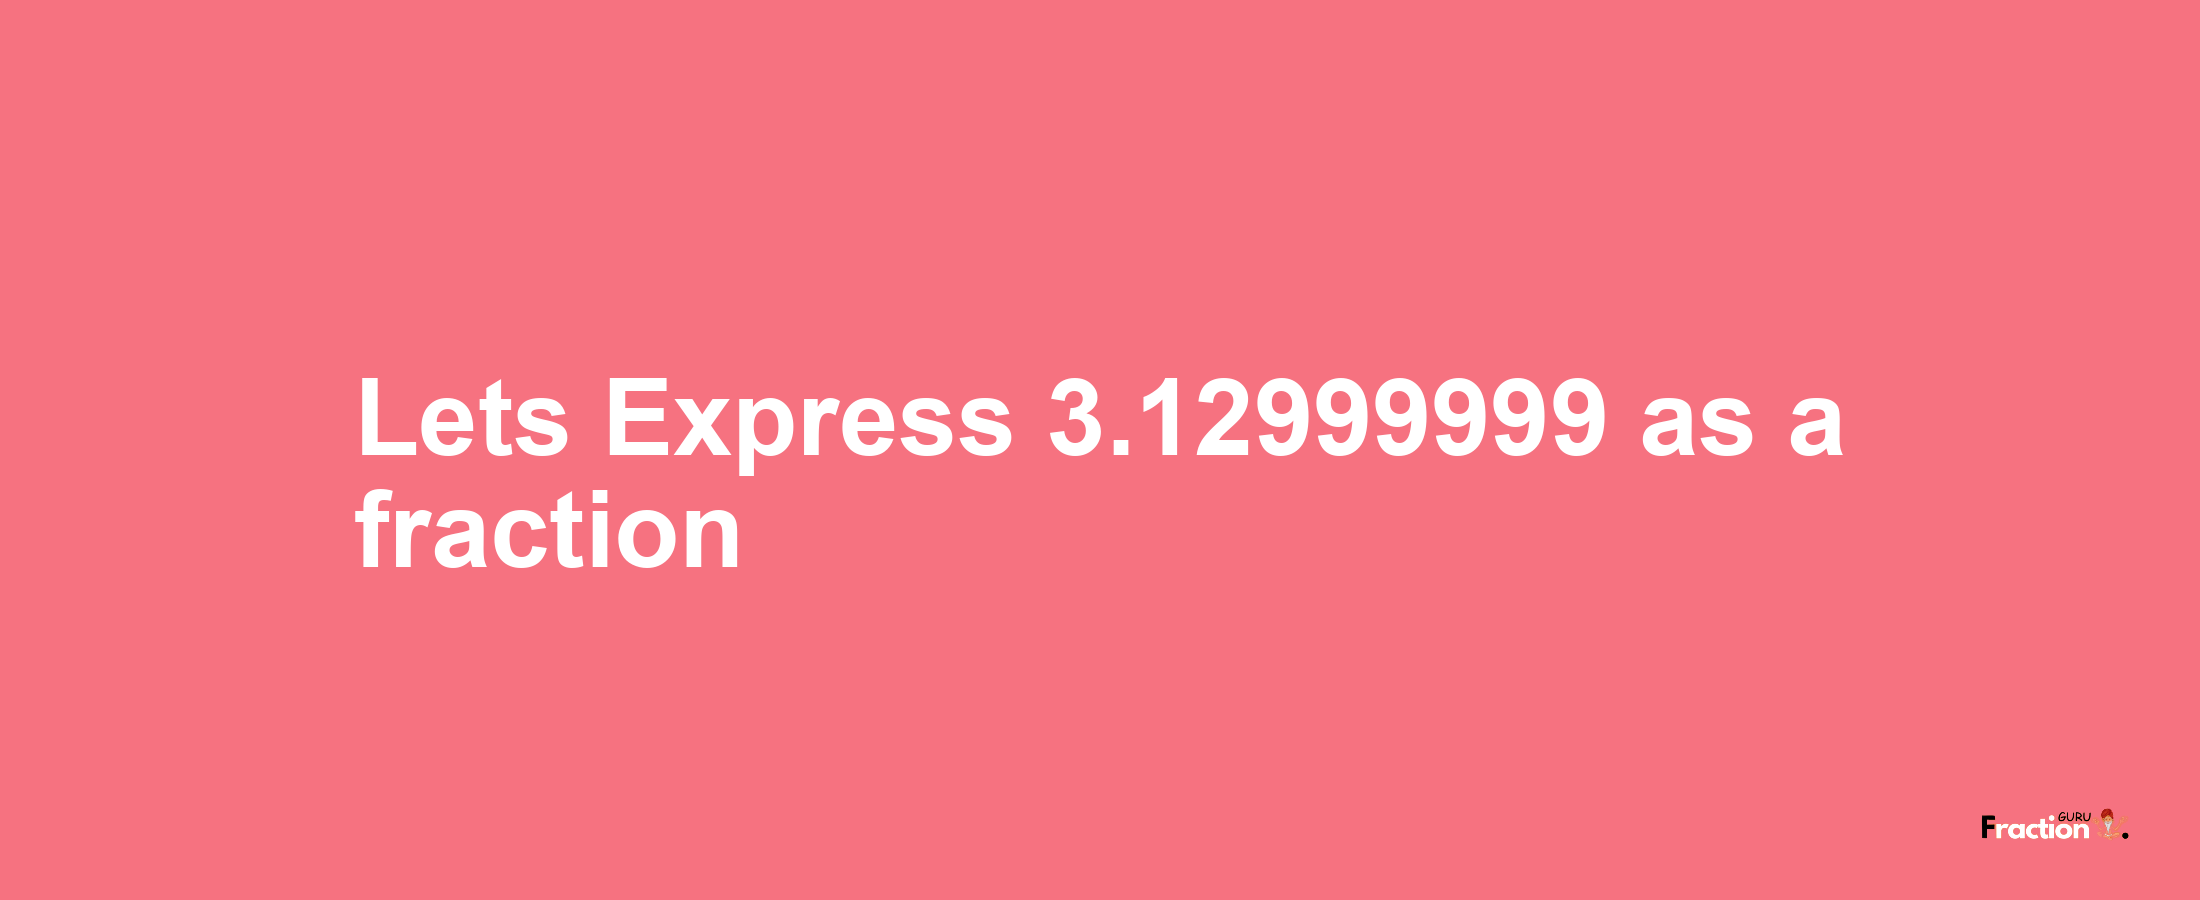 Lets Express 3.12999999 as afraction